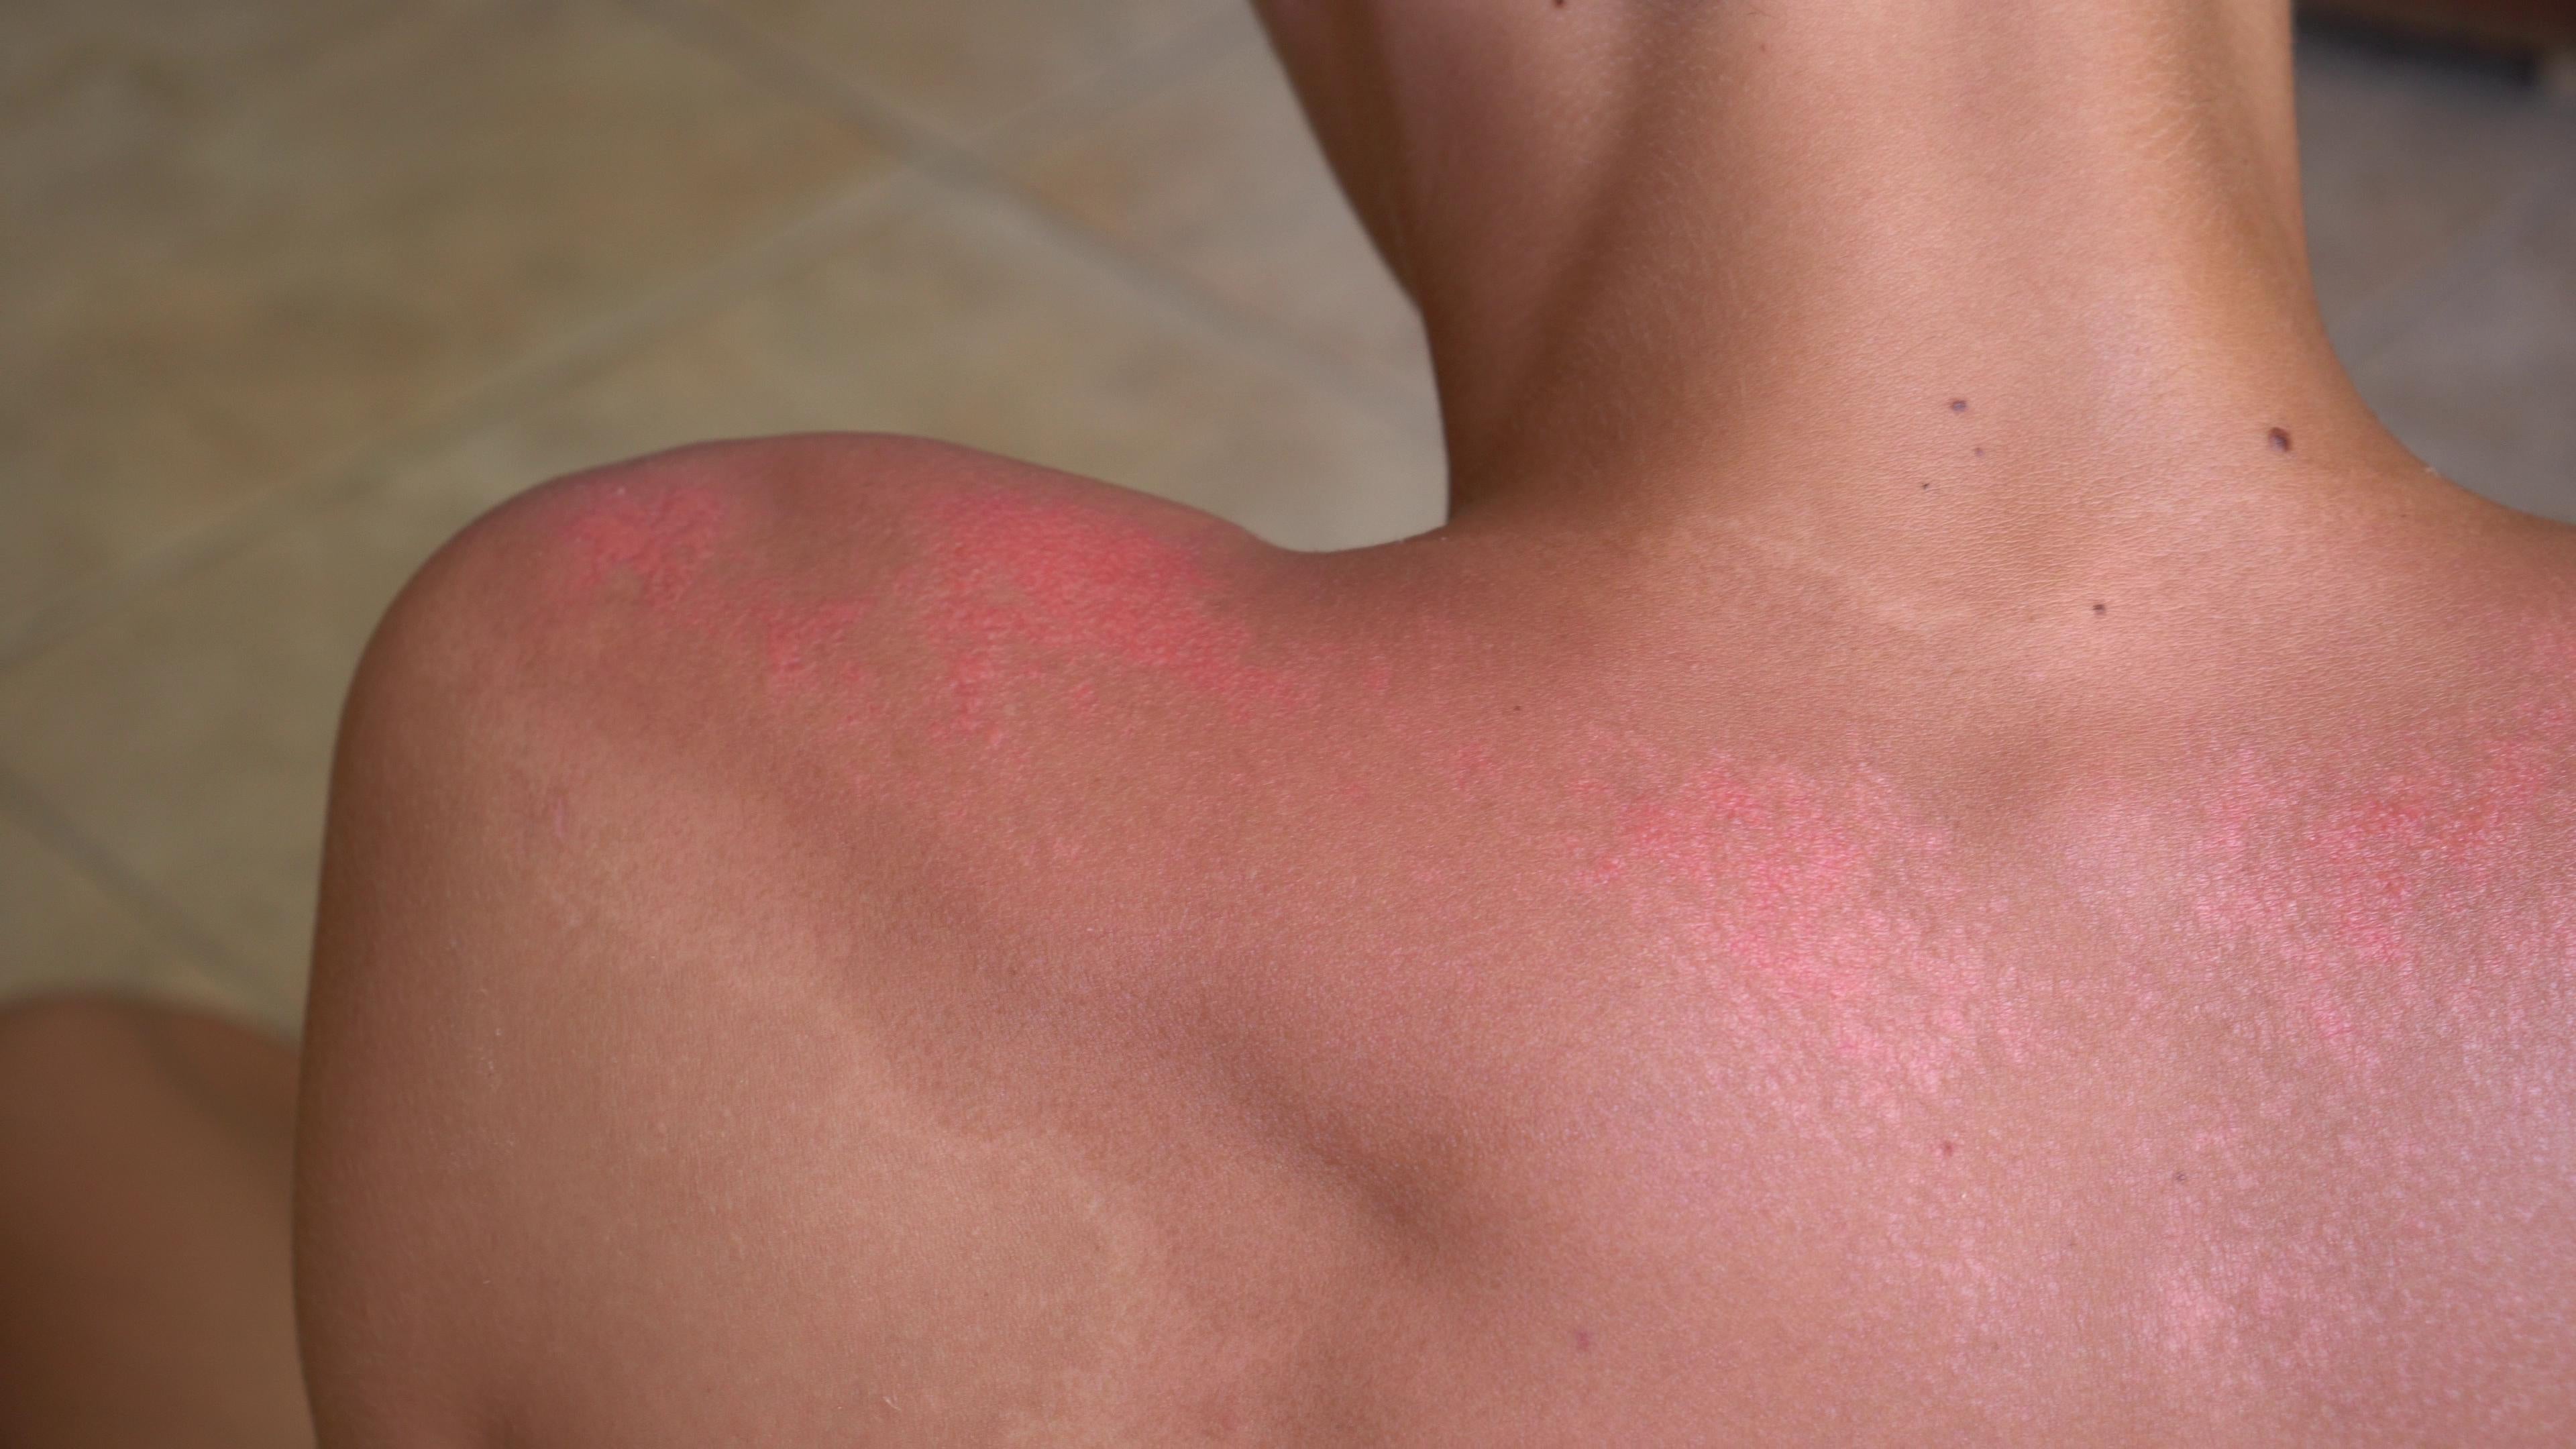 The Symptoms of Second-Degree Burns